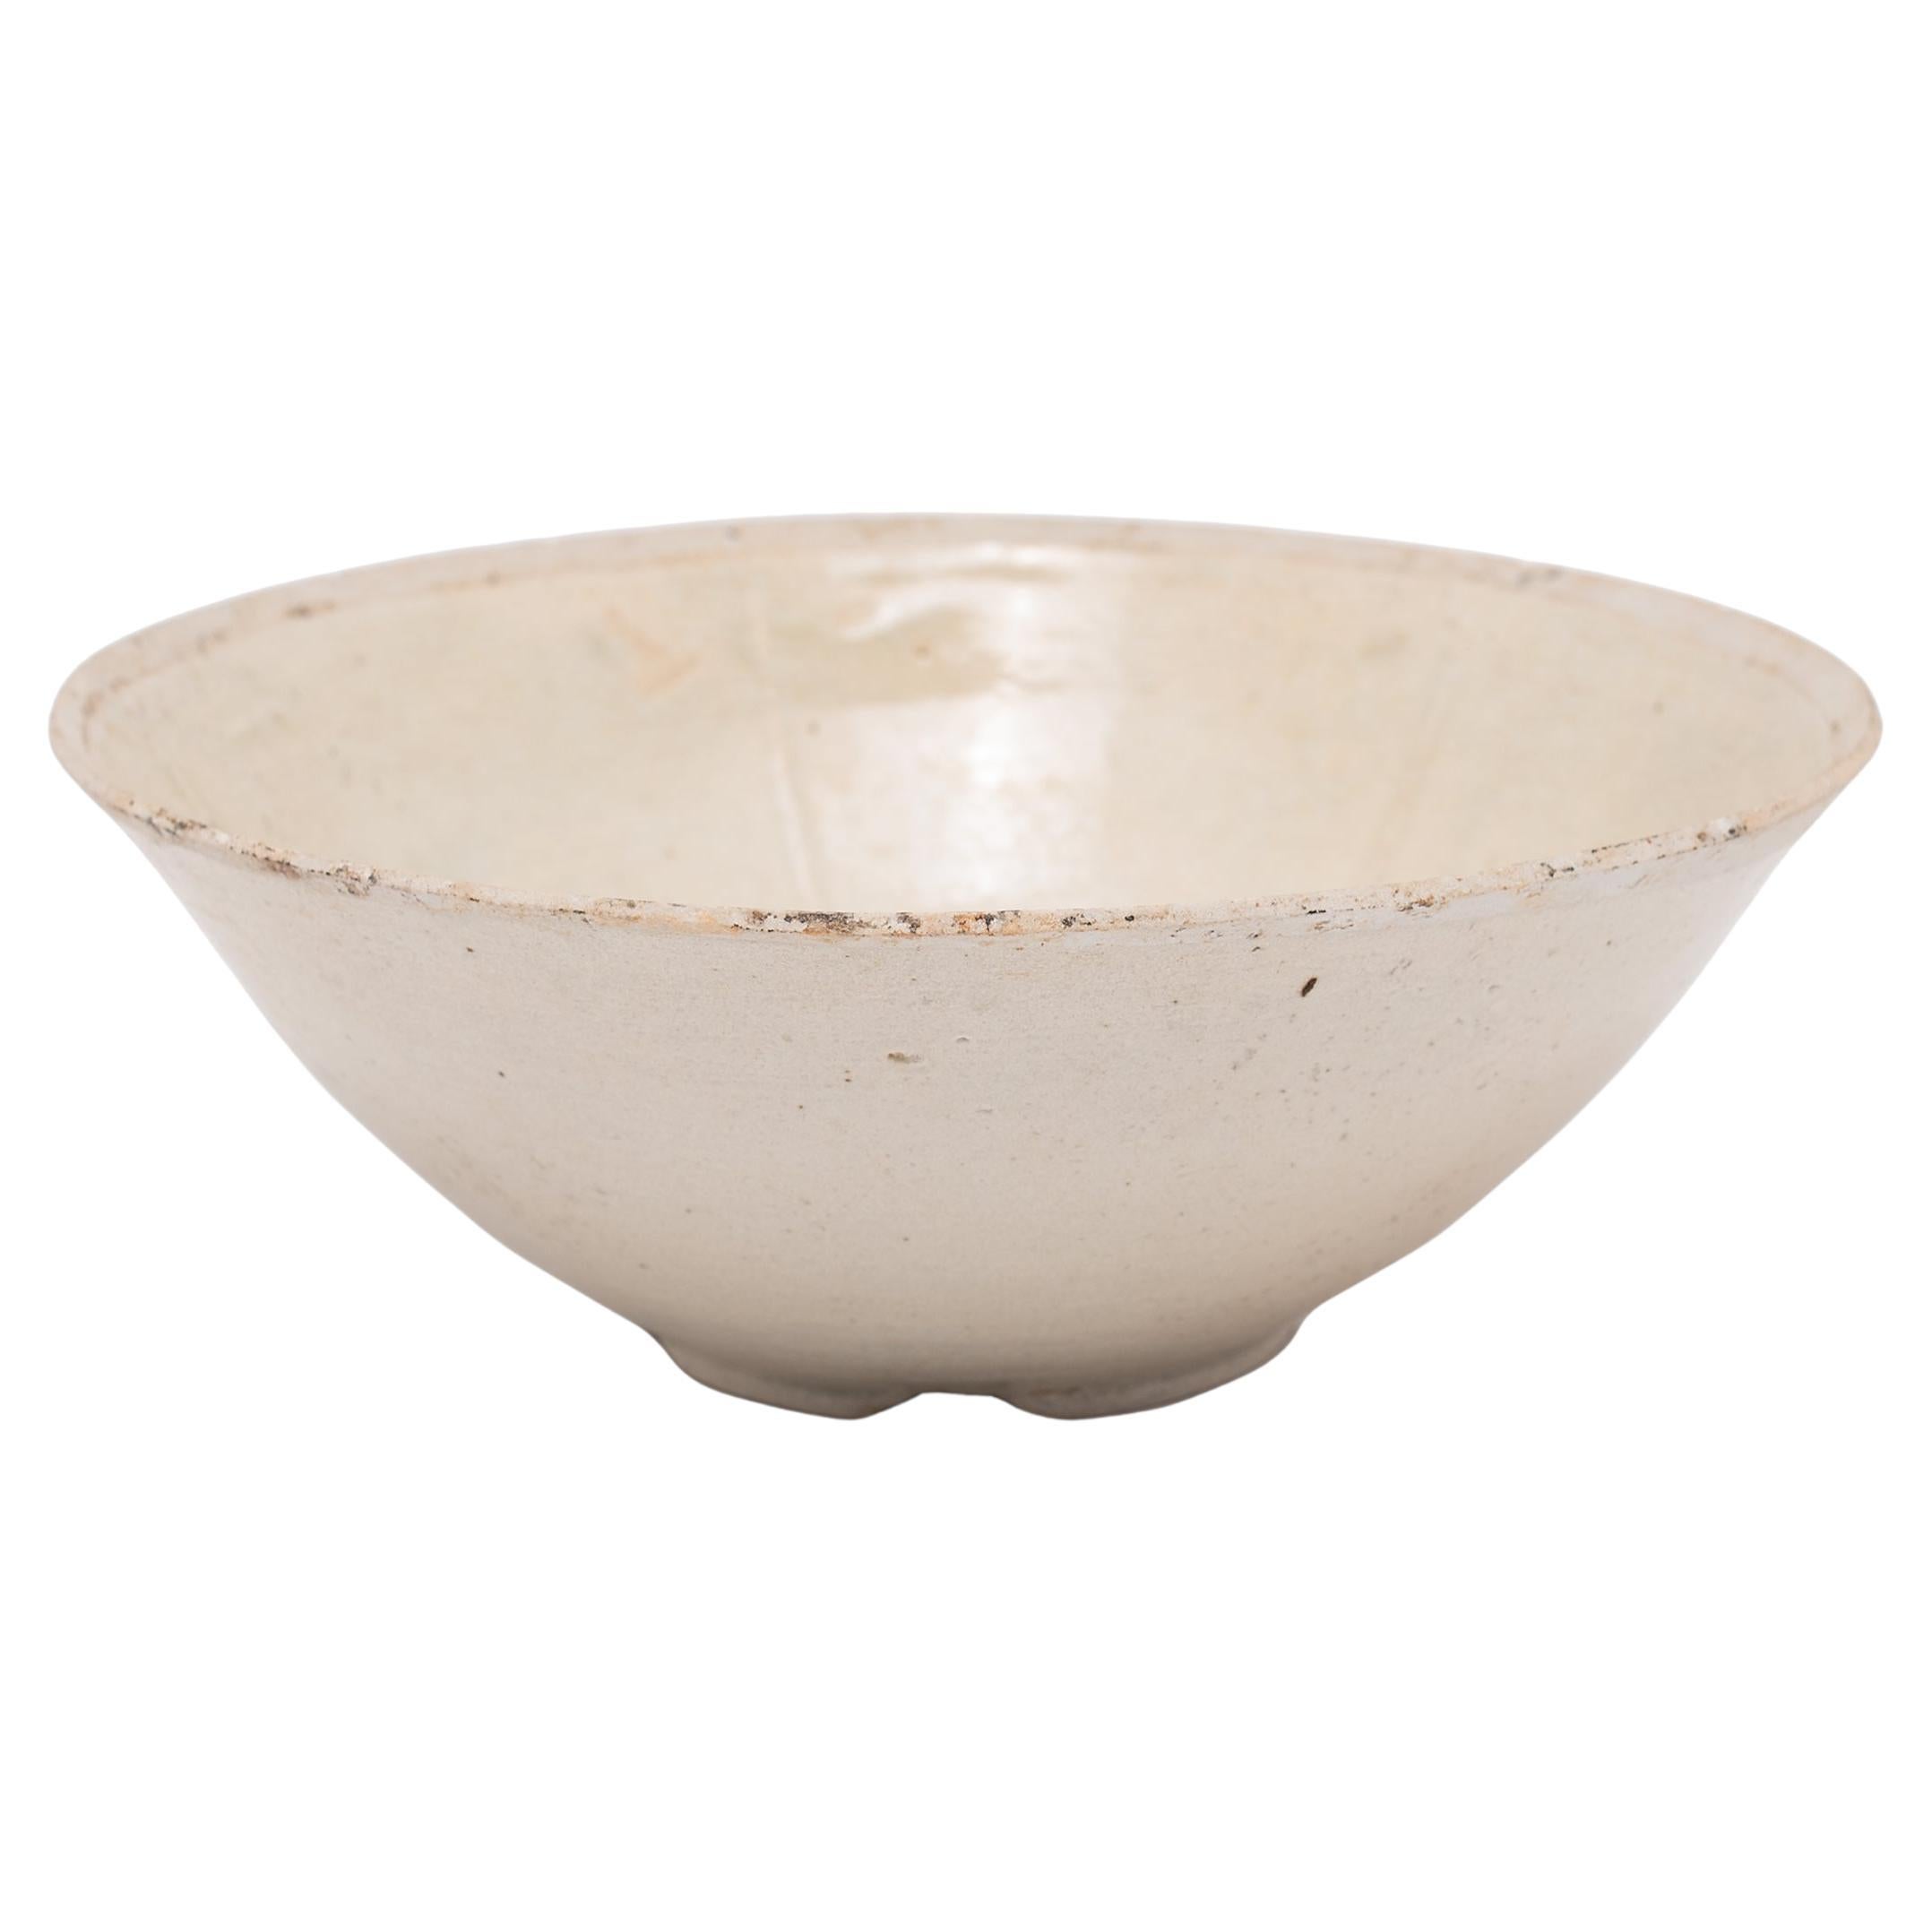 Pale Glazed Chinese Koi Bowl, C. 1850 For Sale